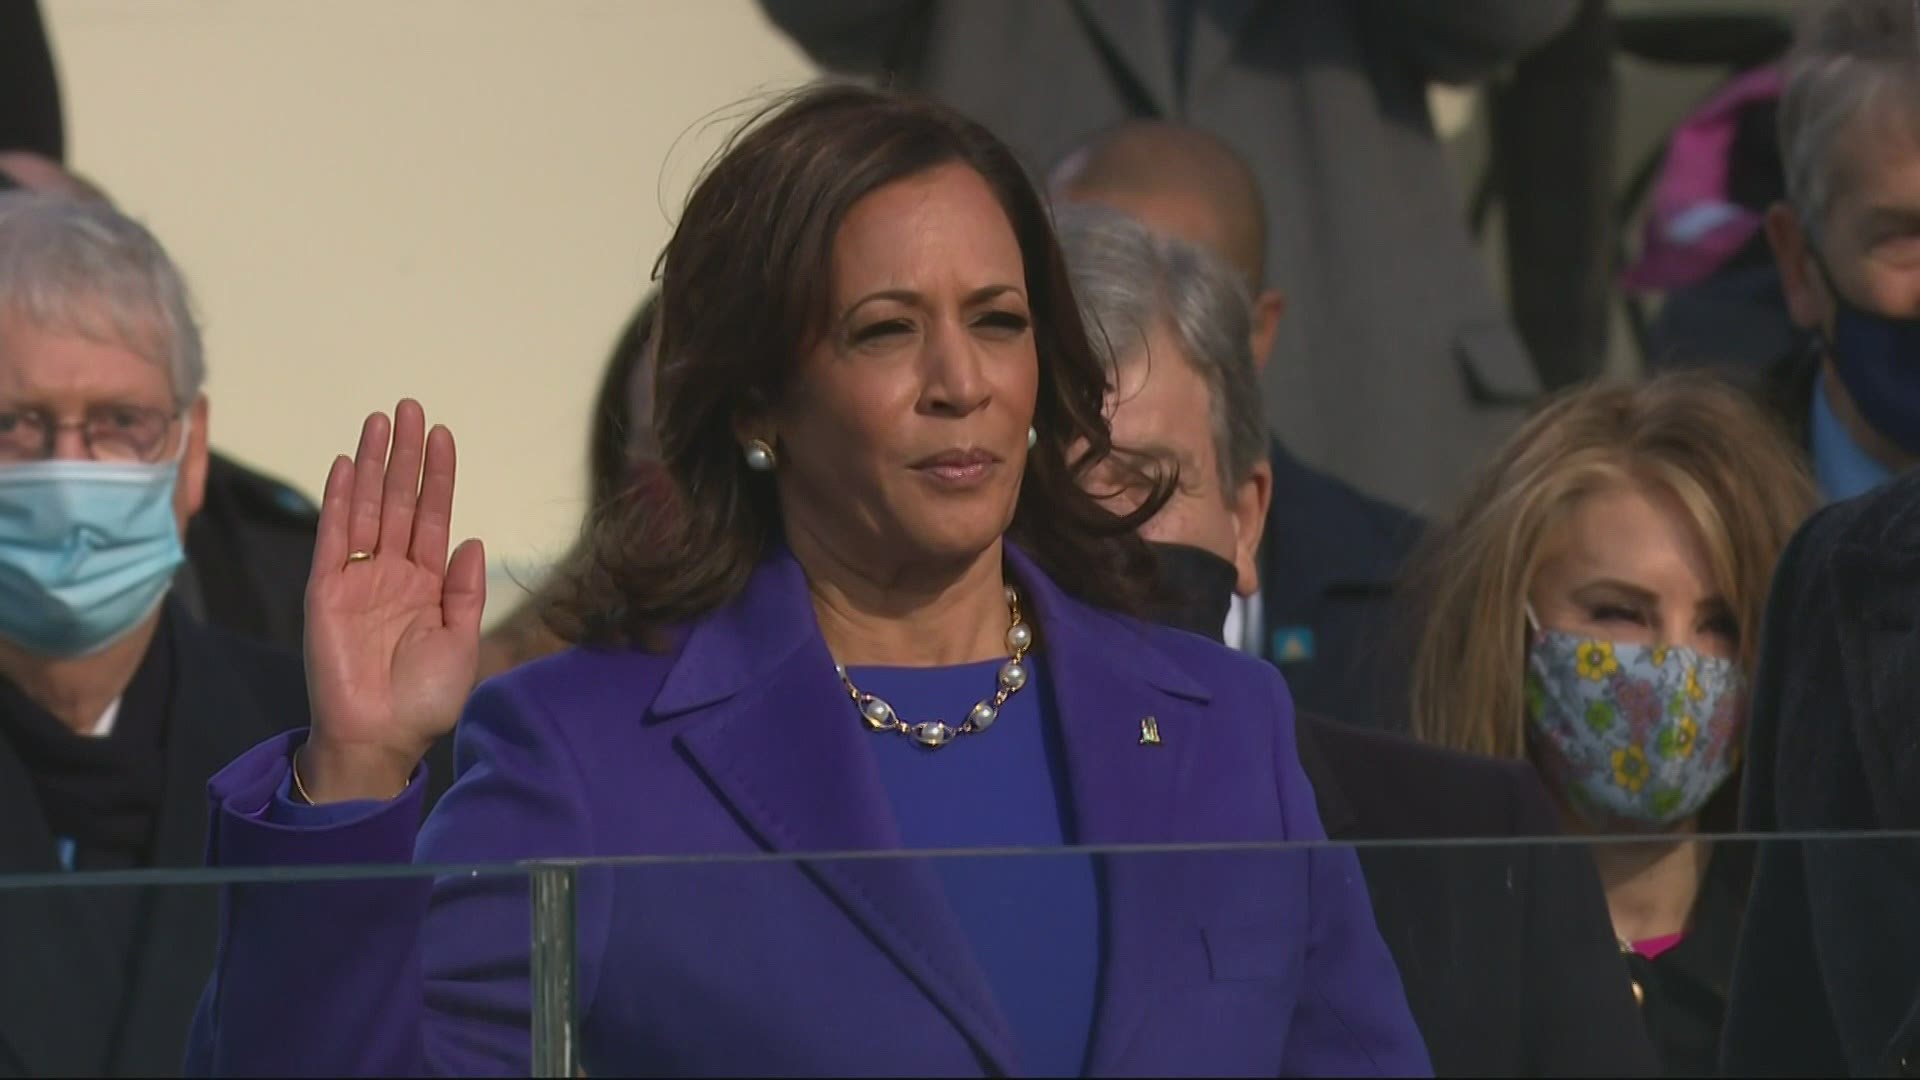 Kamala Harris is the first woman and the first minority vice-president and that has some women excited for the future.